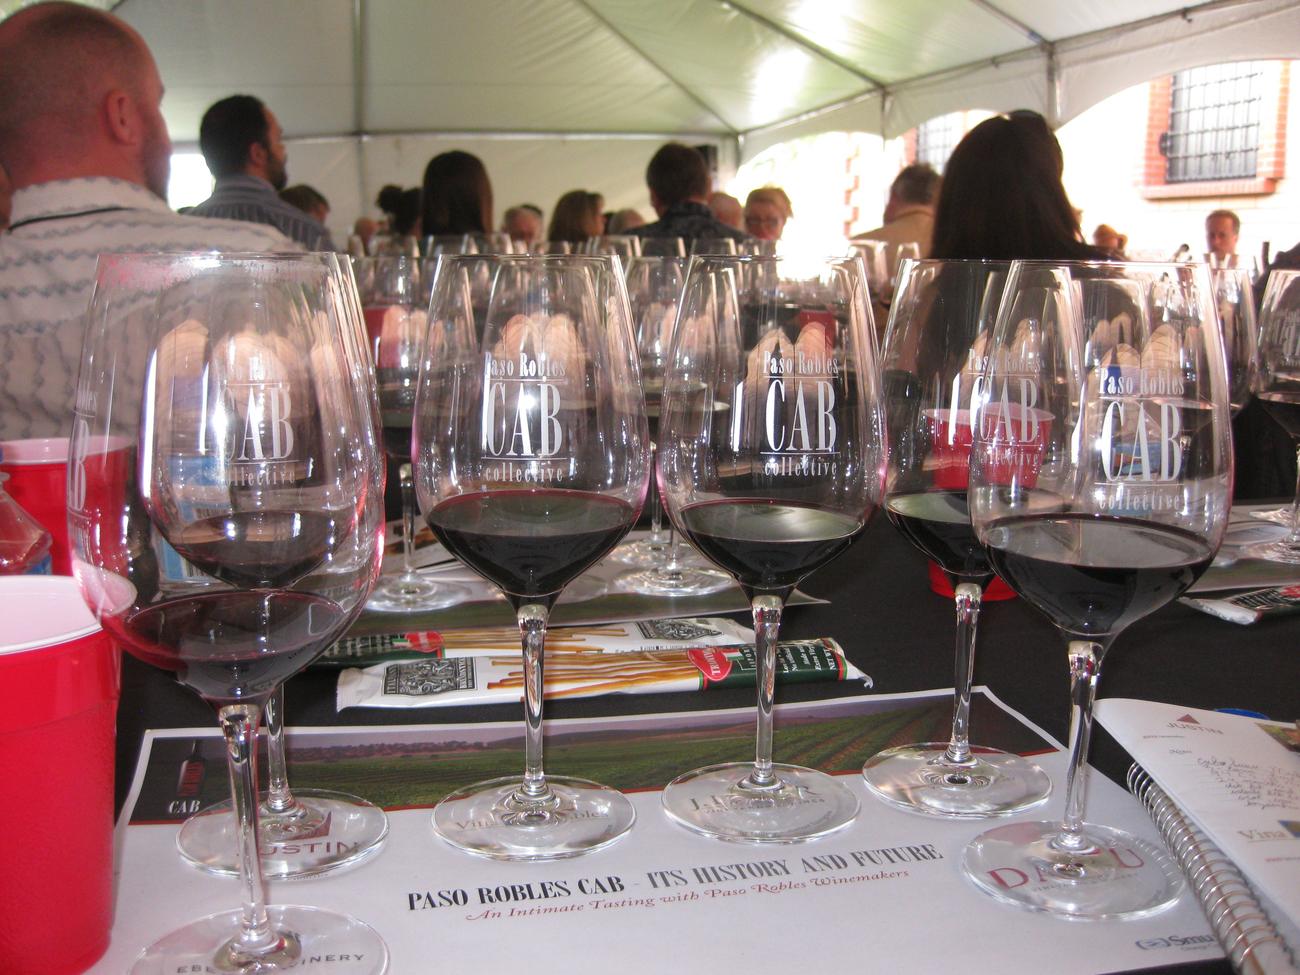 Want Great California Cabernet? Try Paso Robles